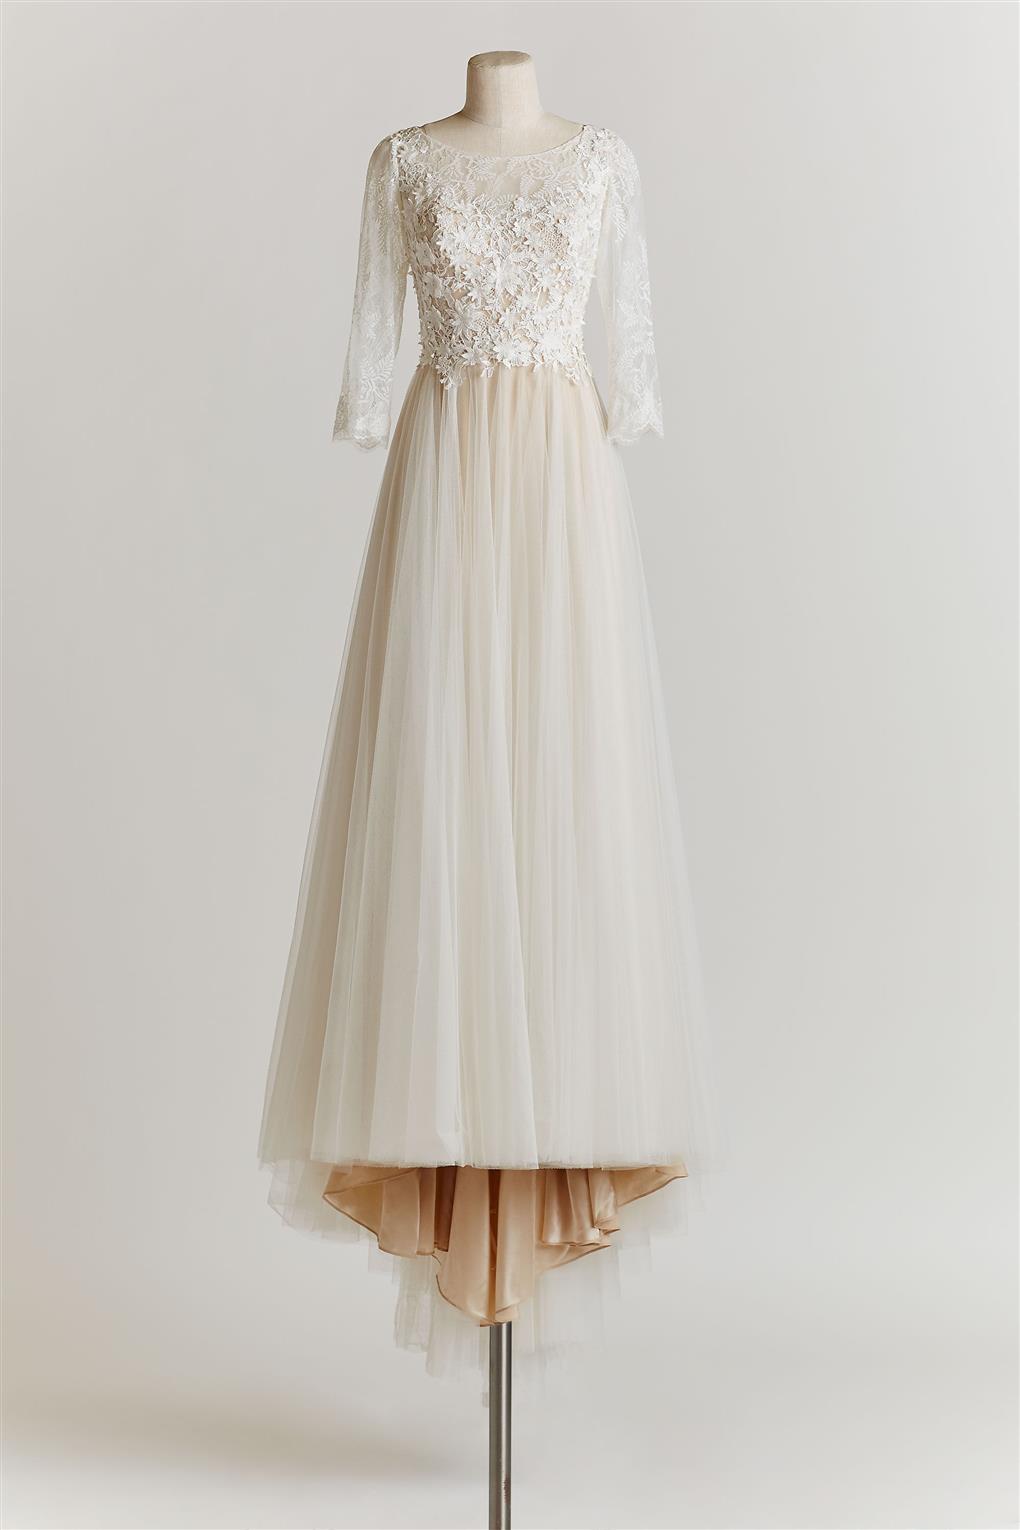 Amelie Wedding Dress from BHLDNs Spring 2015 Collection